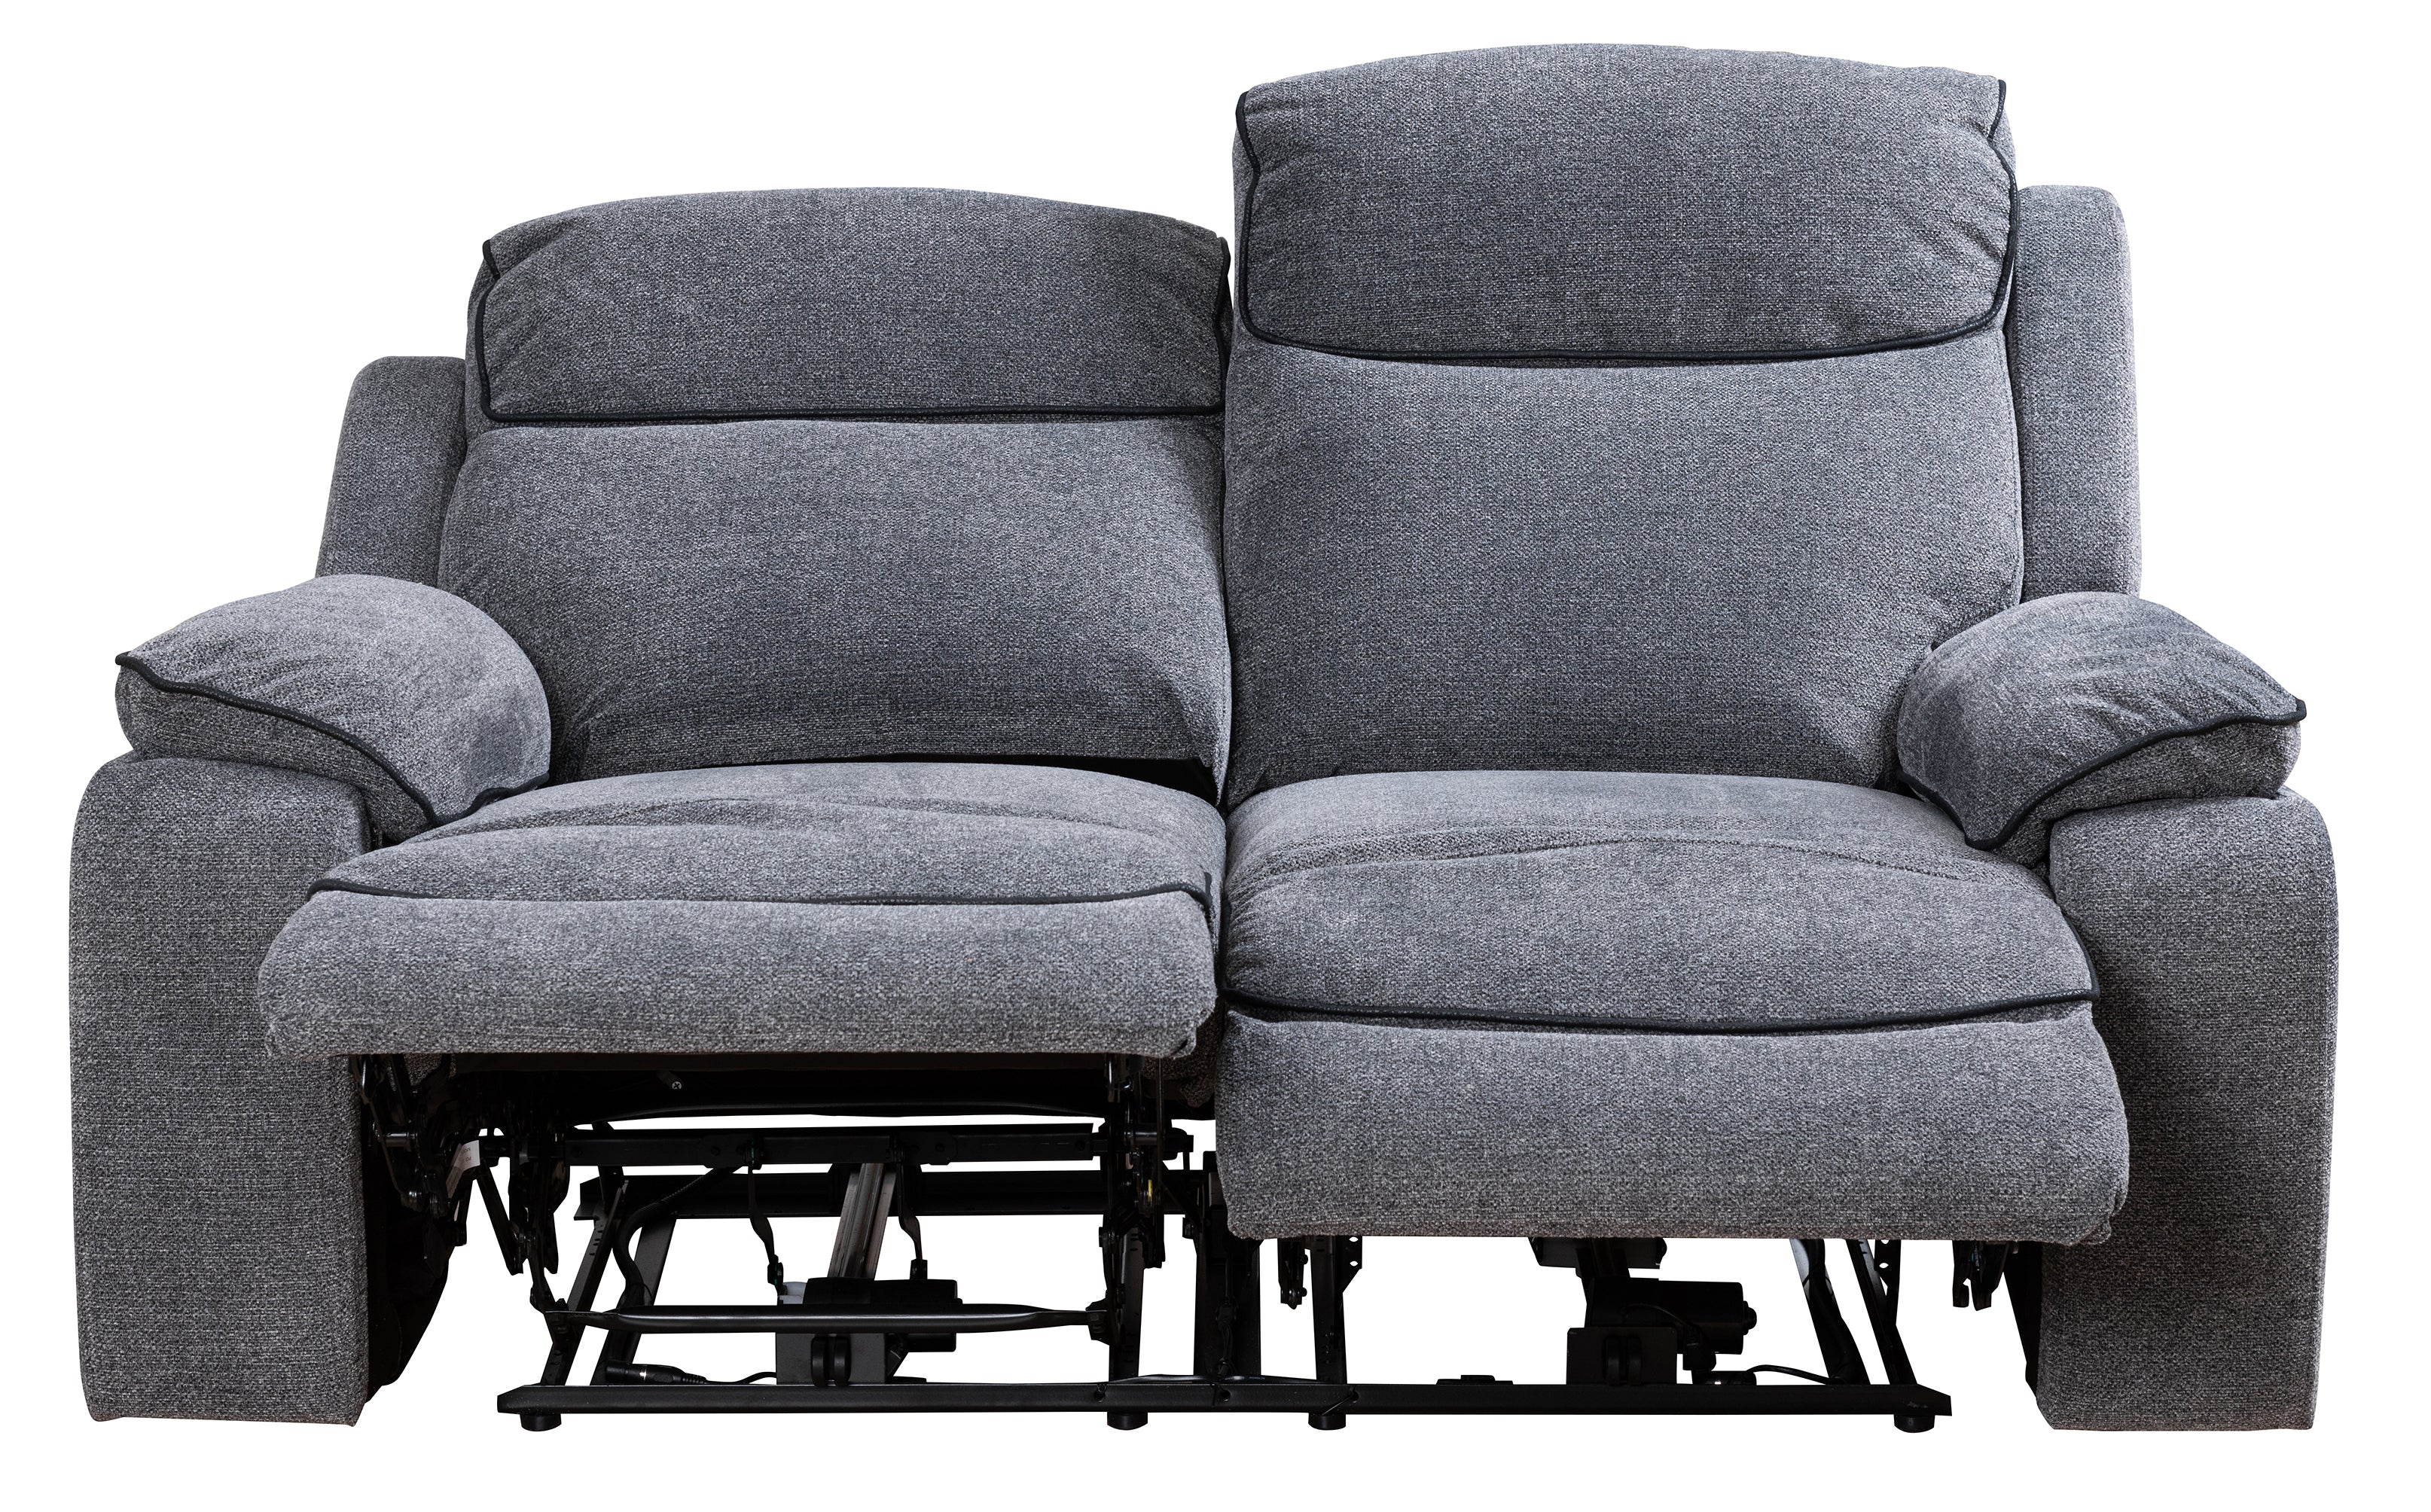 Peru 2 Seater Sofa With Power Recliner